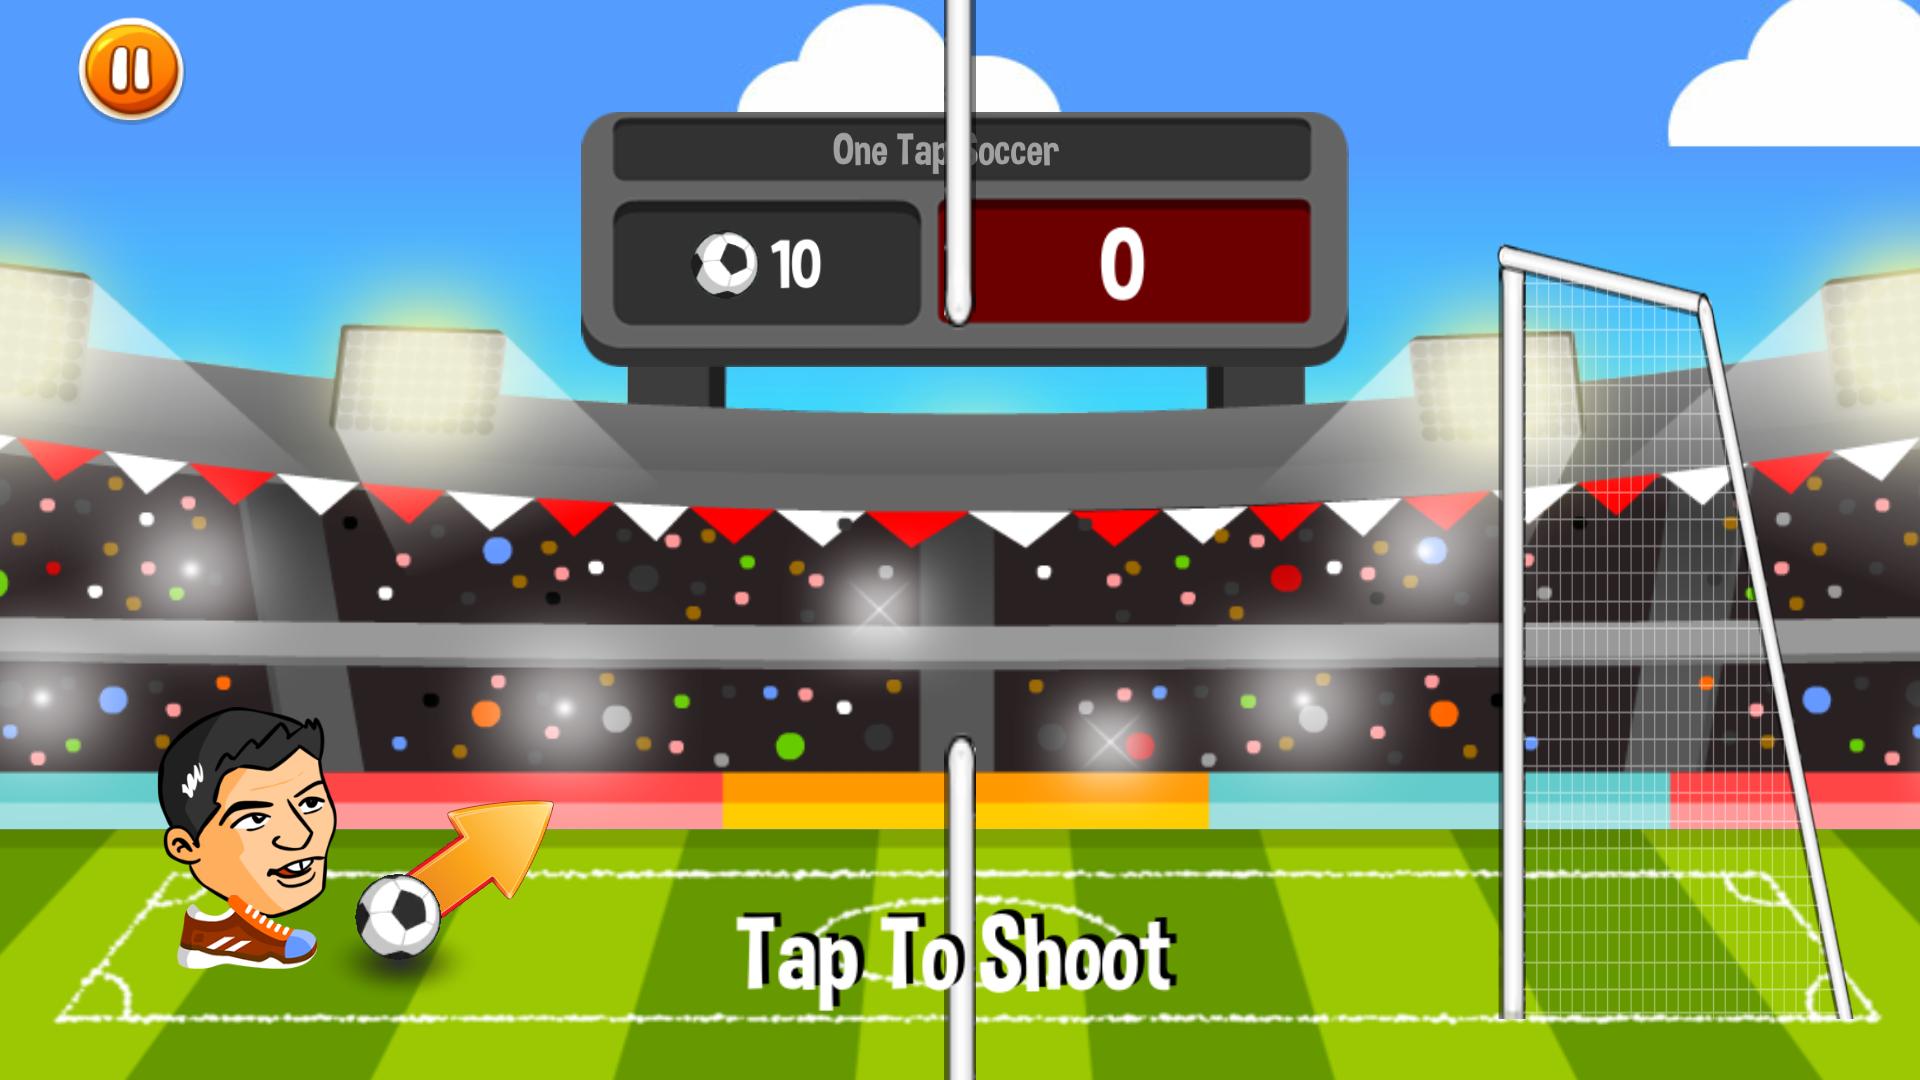 One tap gaming. Head Soccer игра. Создание игры футбол Unity. Тапс. Tap head Android.